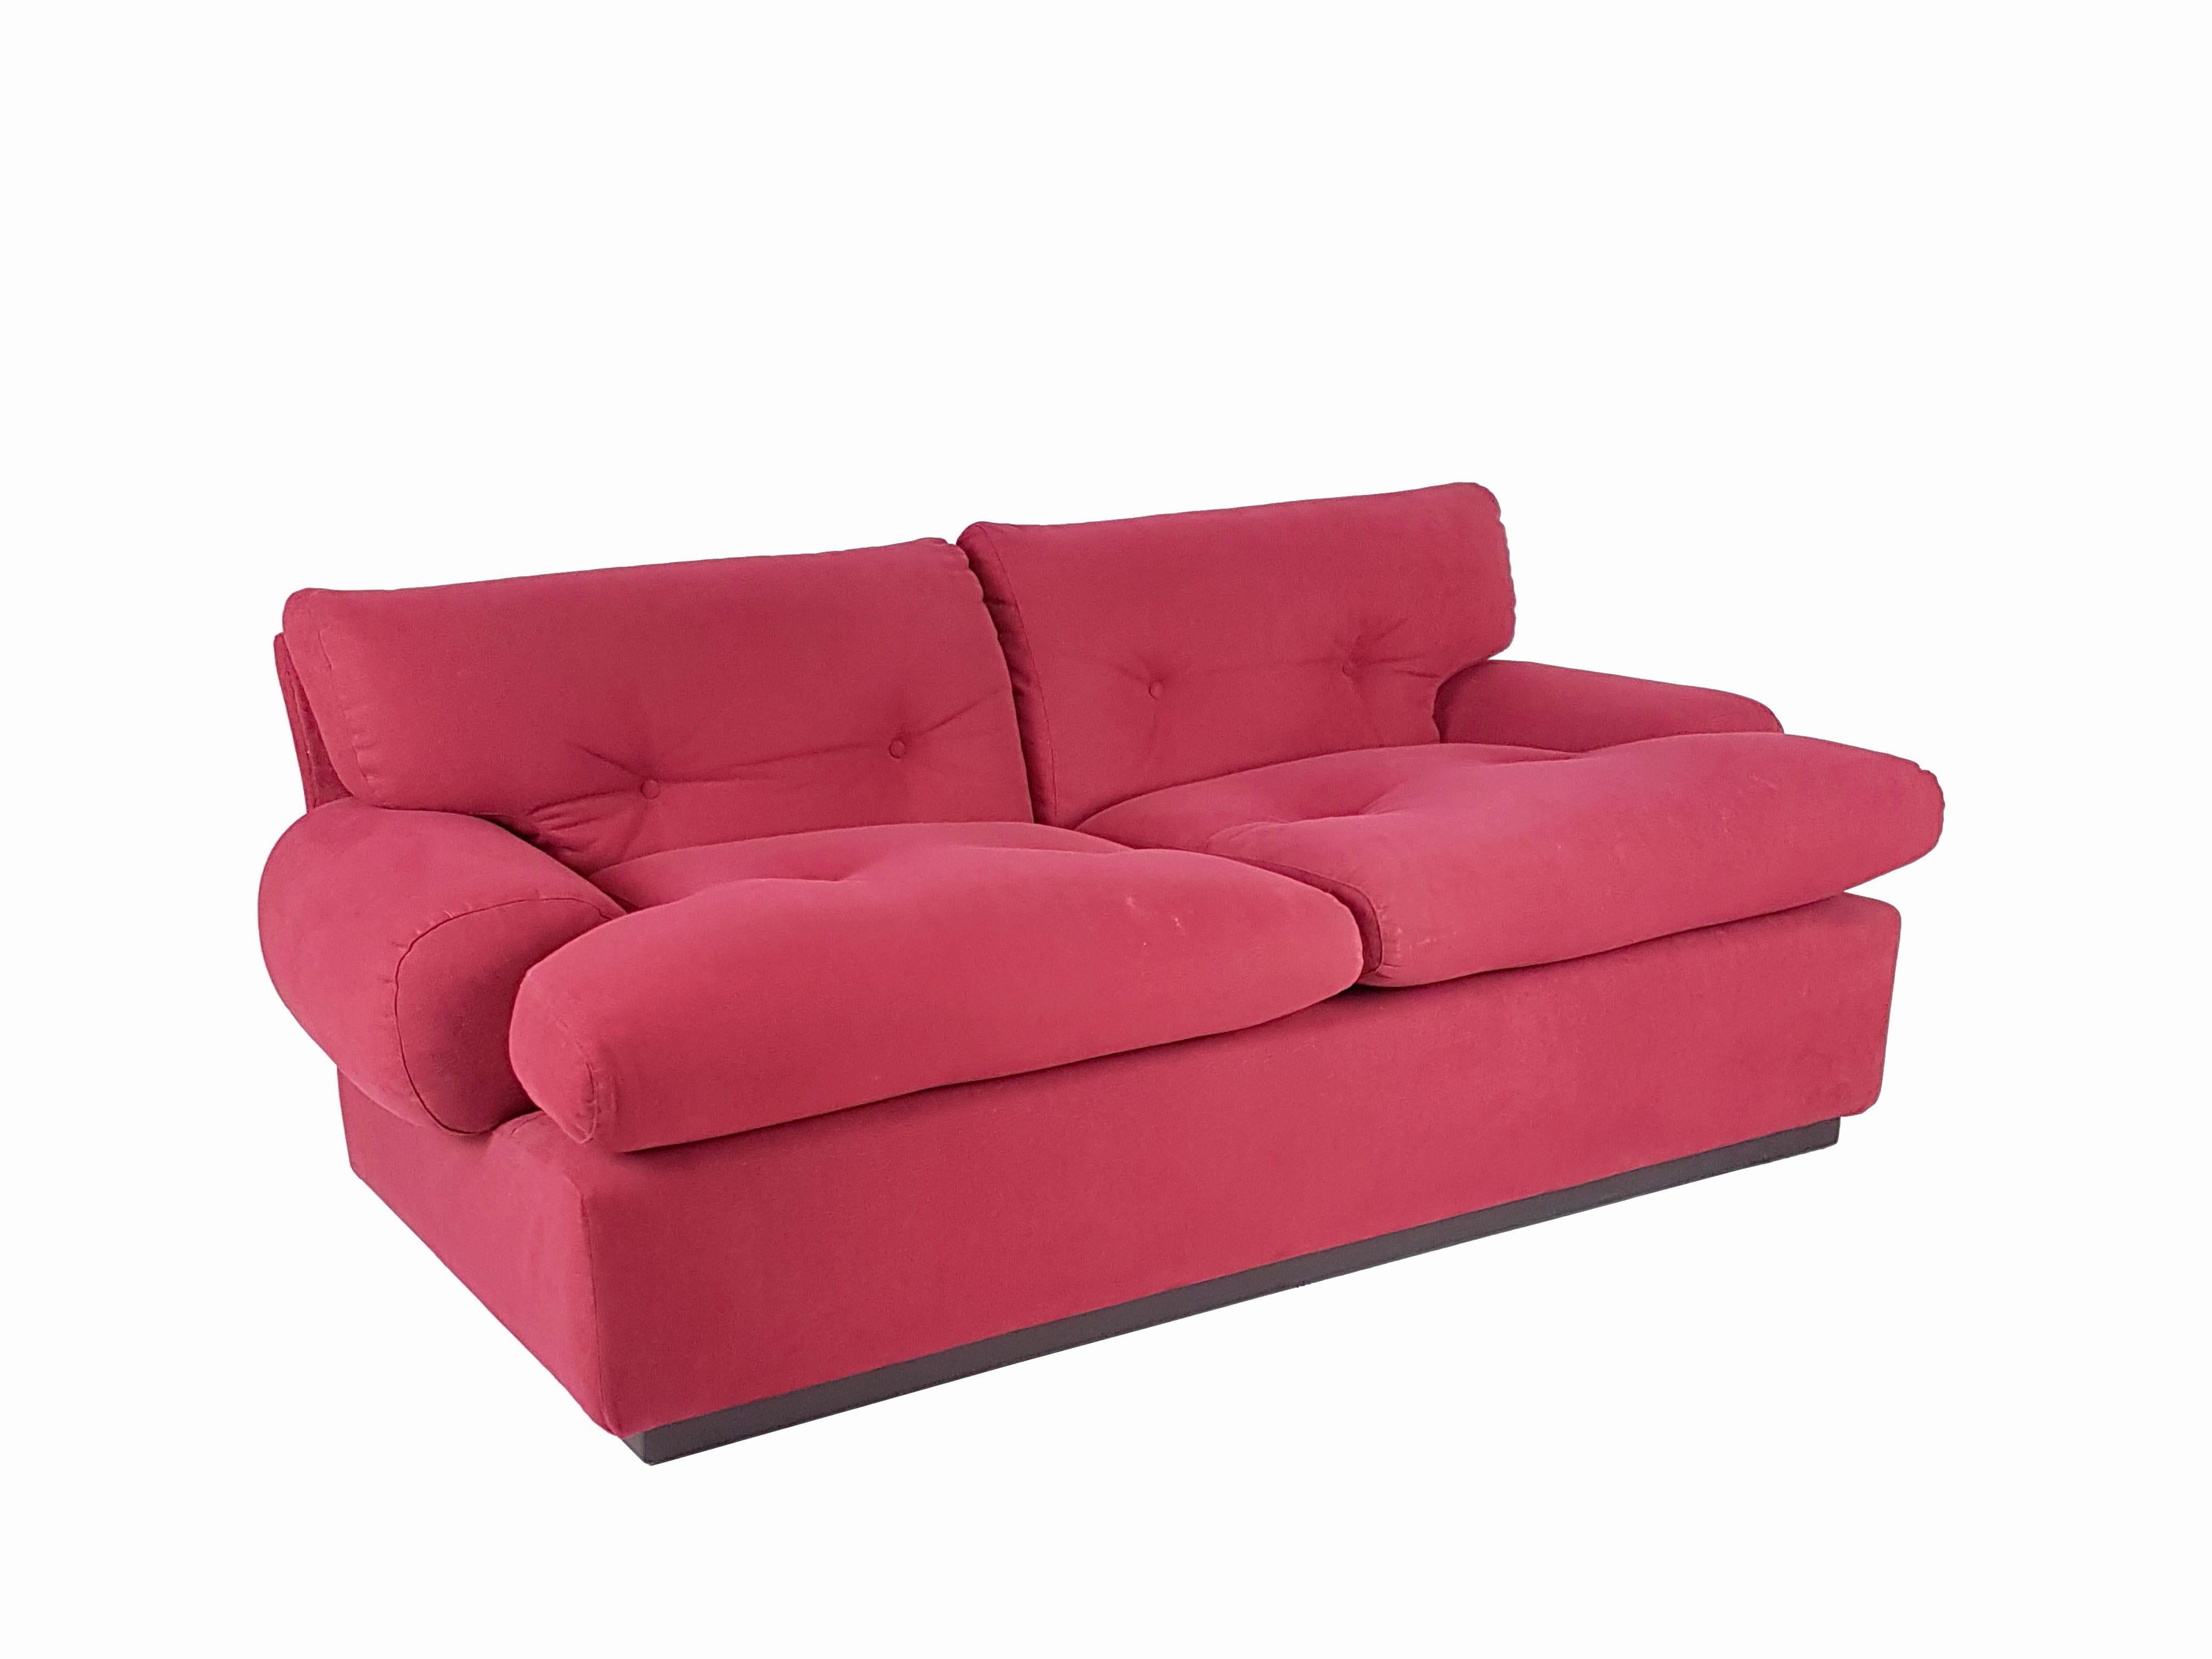 This pair of 2-seat sofa was designed and produced in Italy at the end of the 1960s. They have been originally upholstered with Alcantara synthetic fabric in a precious crimson color. They feature a wooden frame base and remain in very good